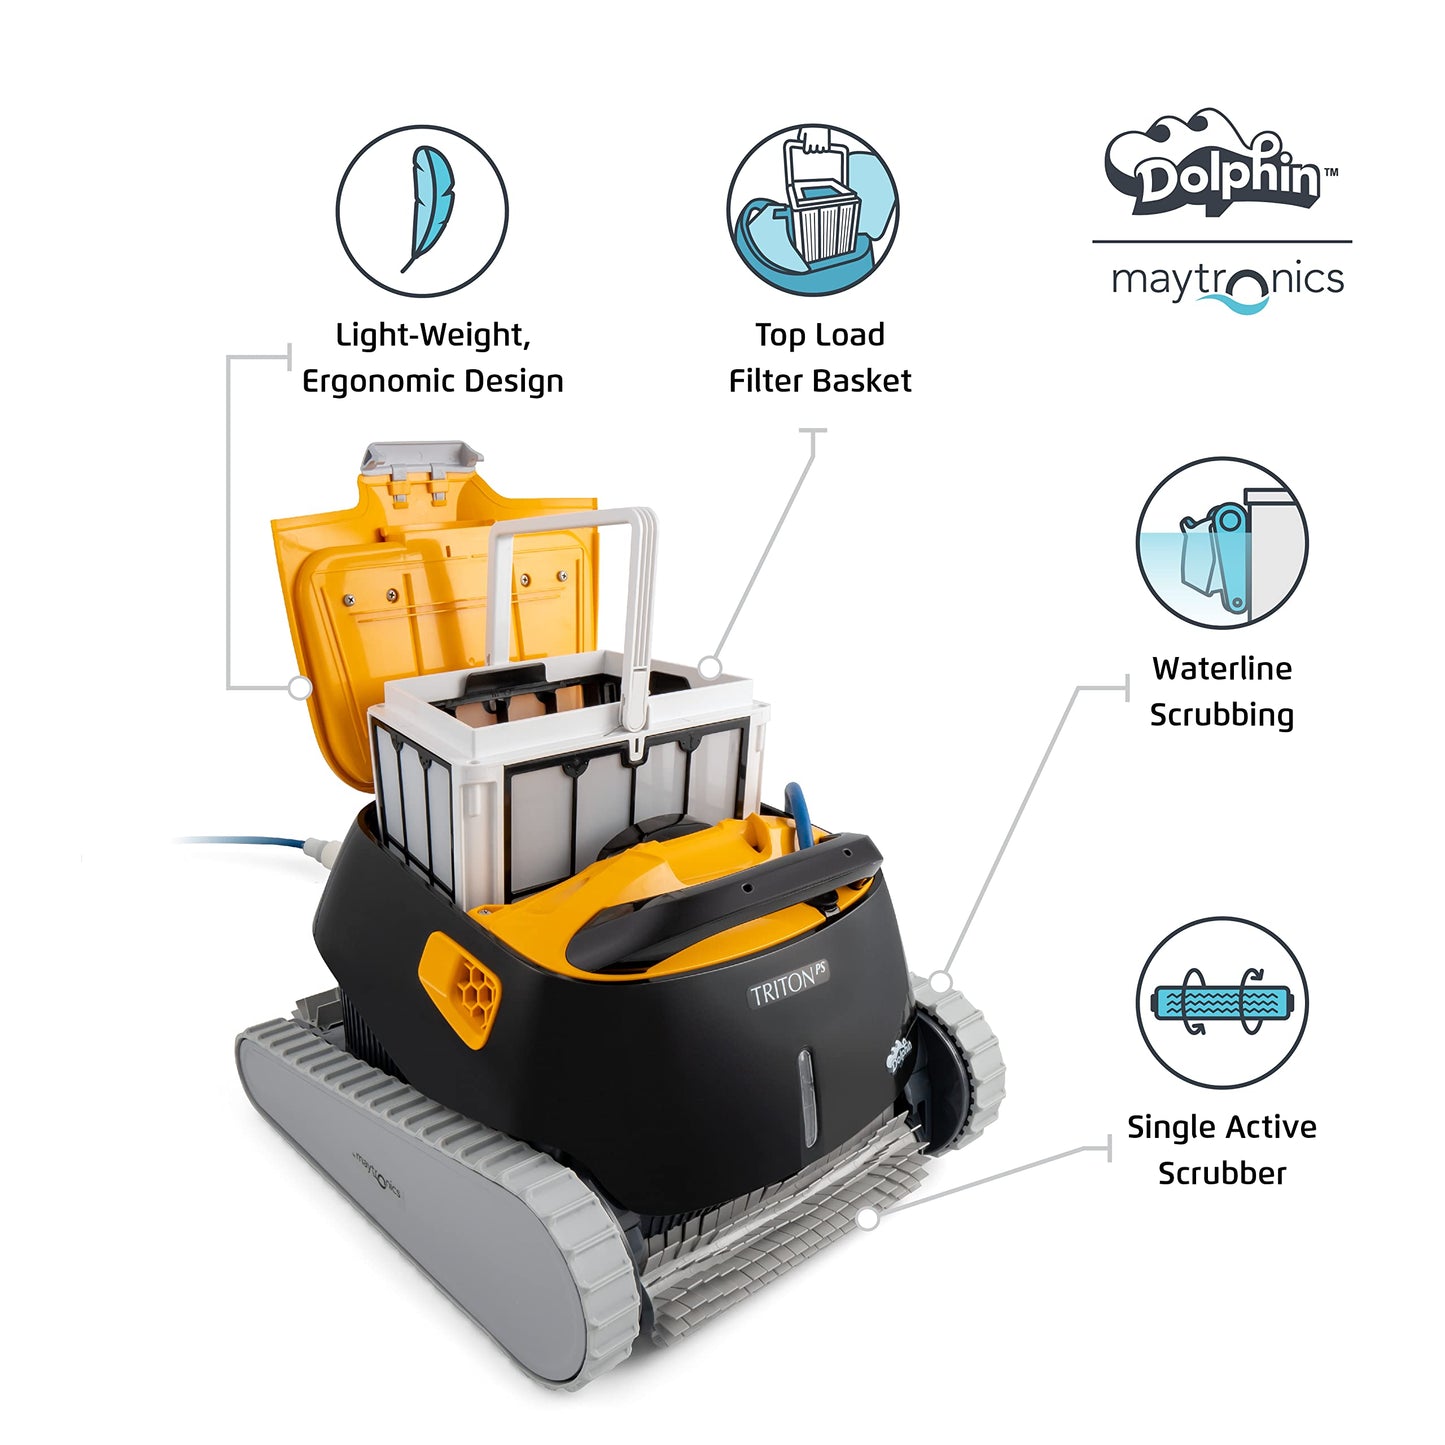 Dolphin Triton PS Robotic Pool [Vacuum] Cleaner - Ideal for In Ground Swimming Pools up to 50 Feet - Powerful Suction to Pick up Small Debris - Extra Large Easy to Clean Top Load Filter Basket